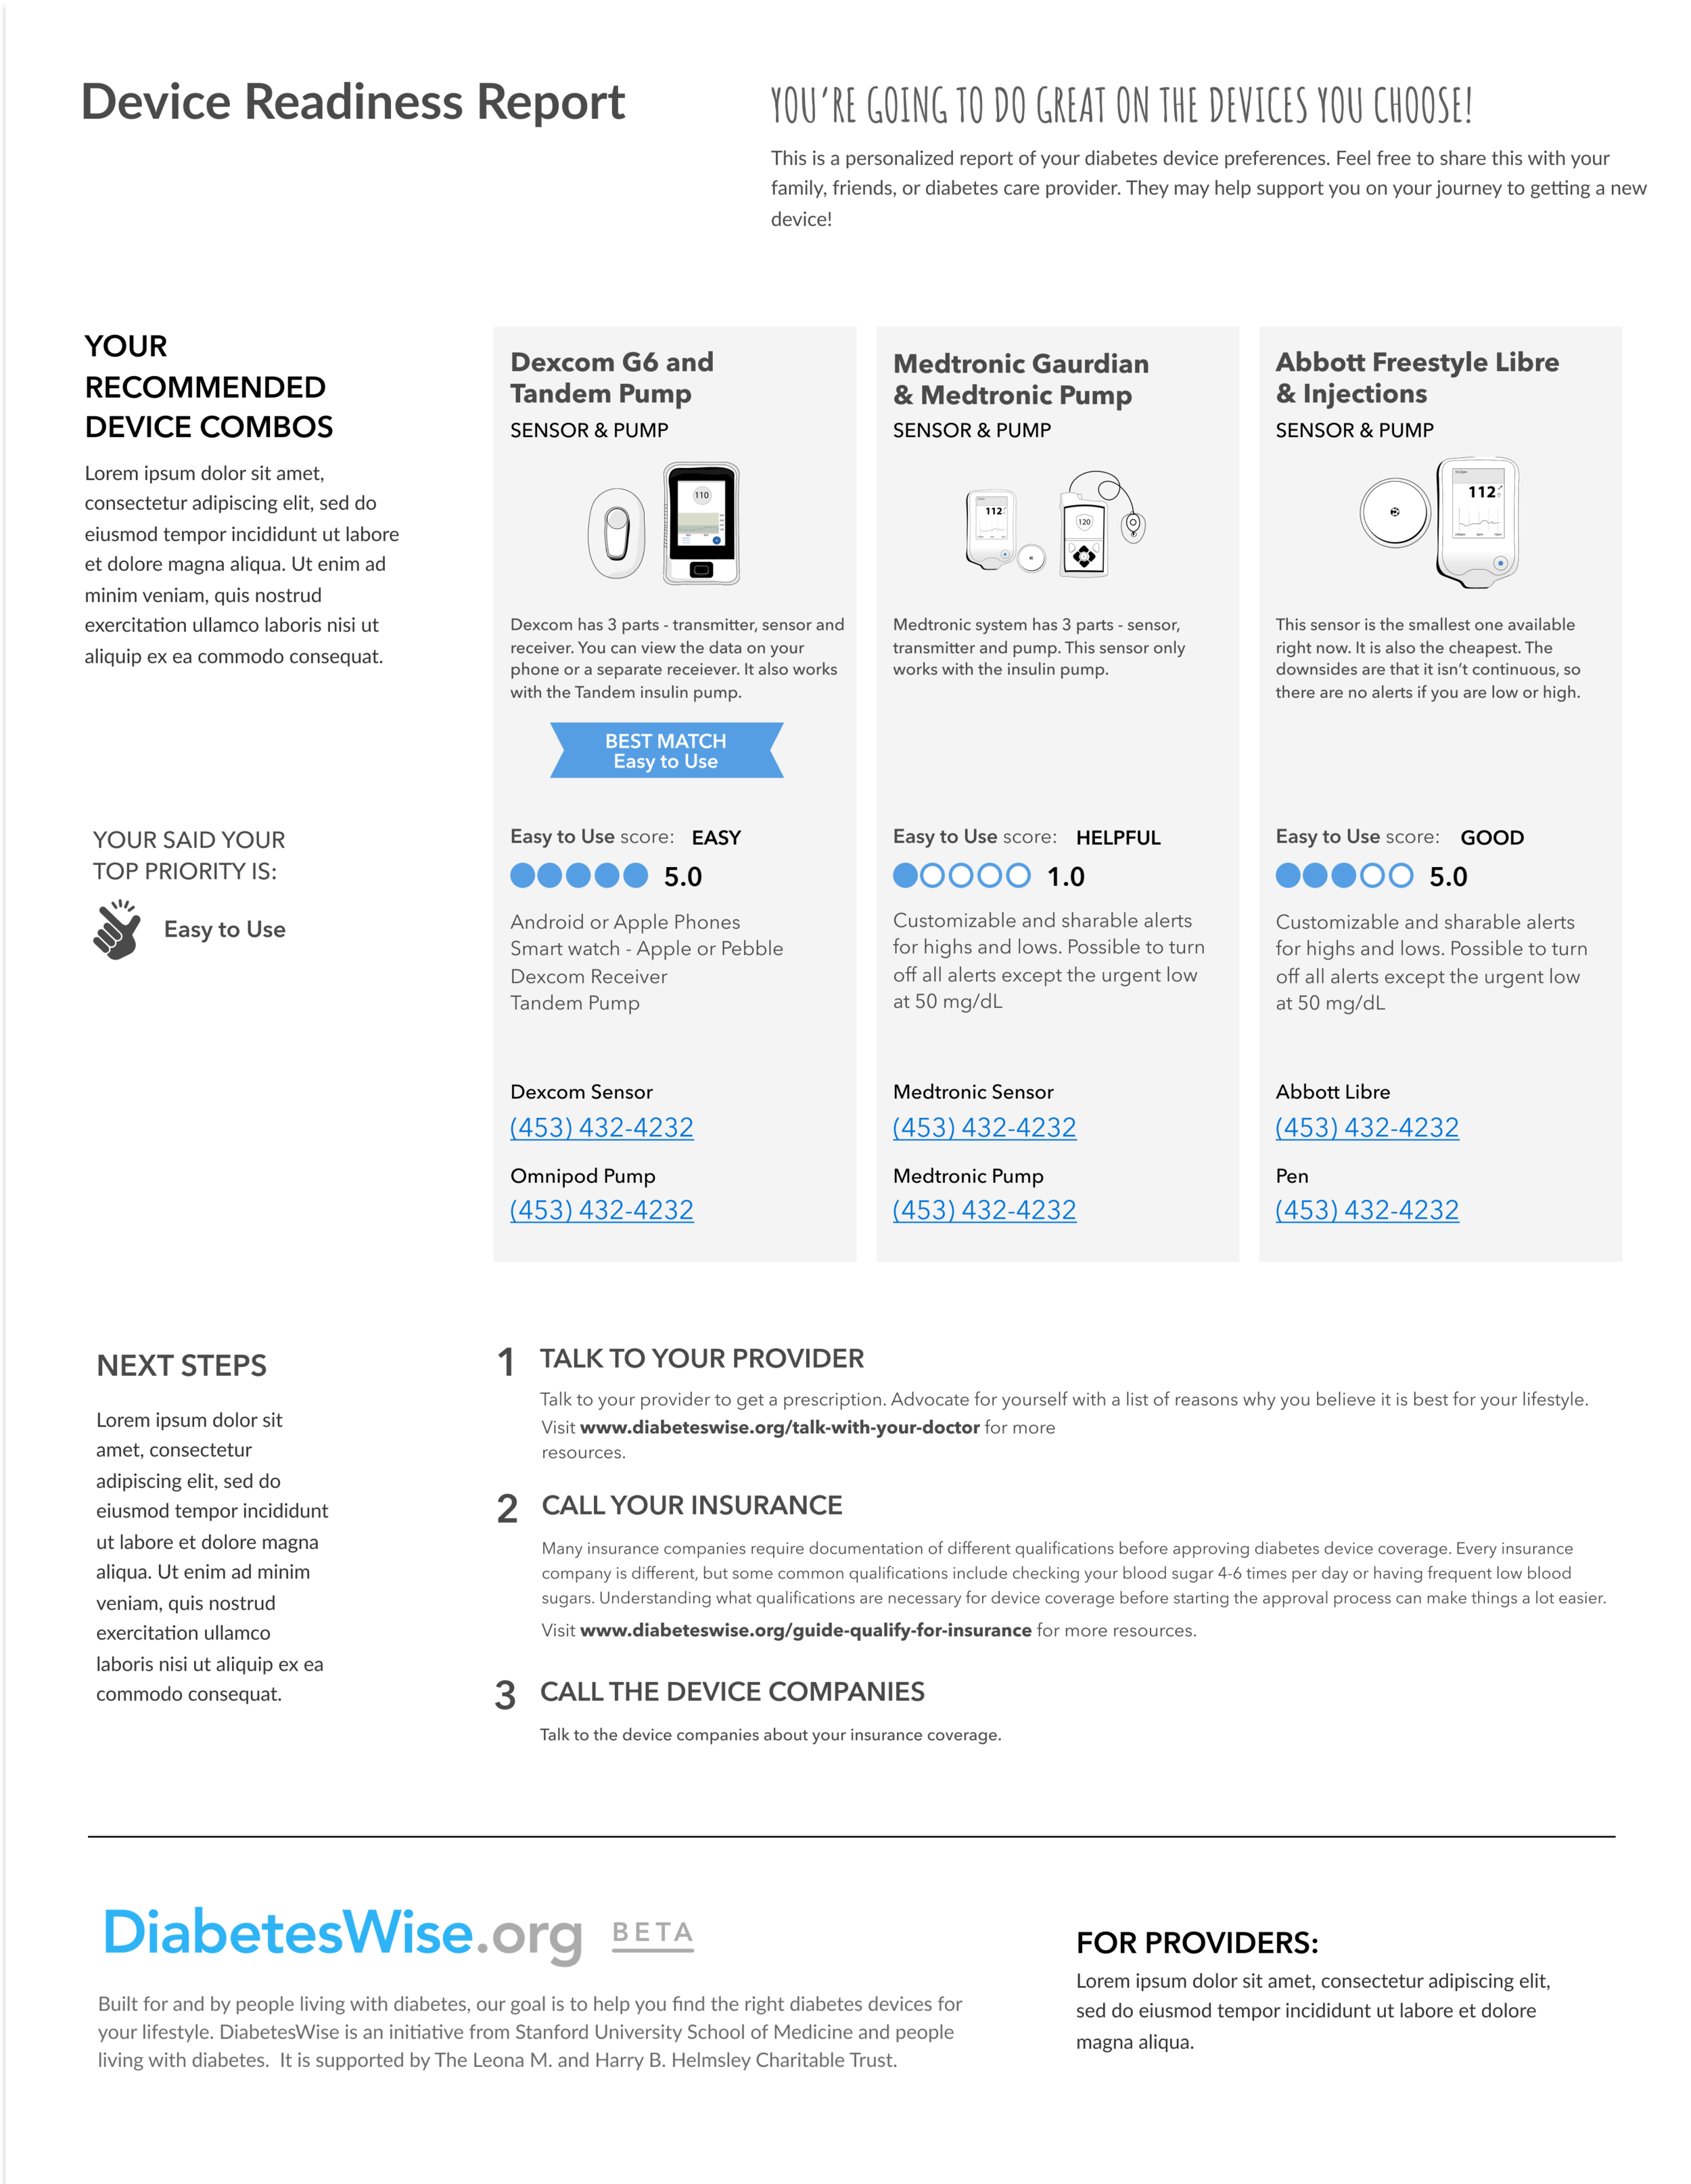 Versions of the Device Readiness Report